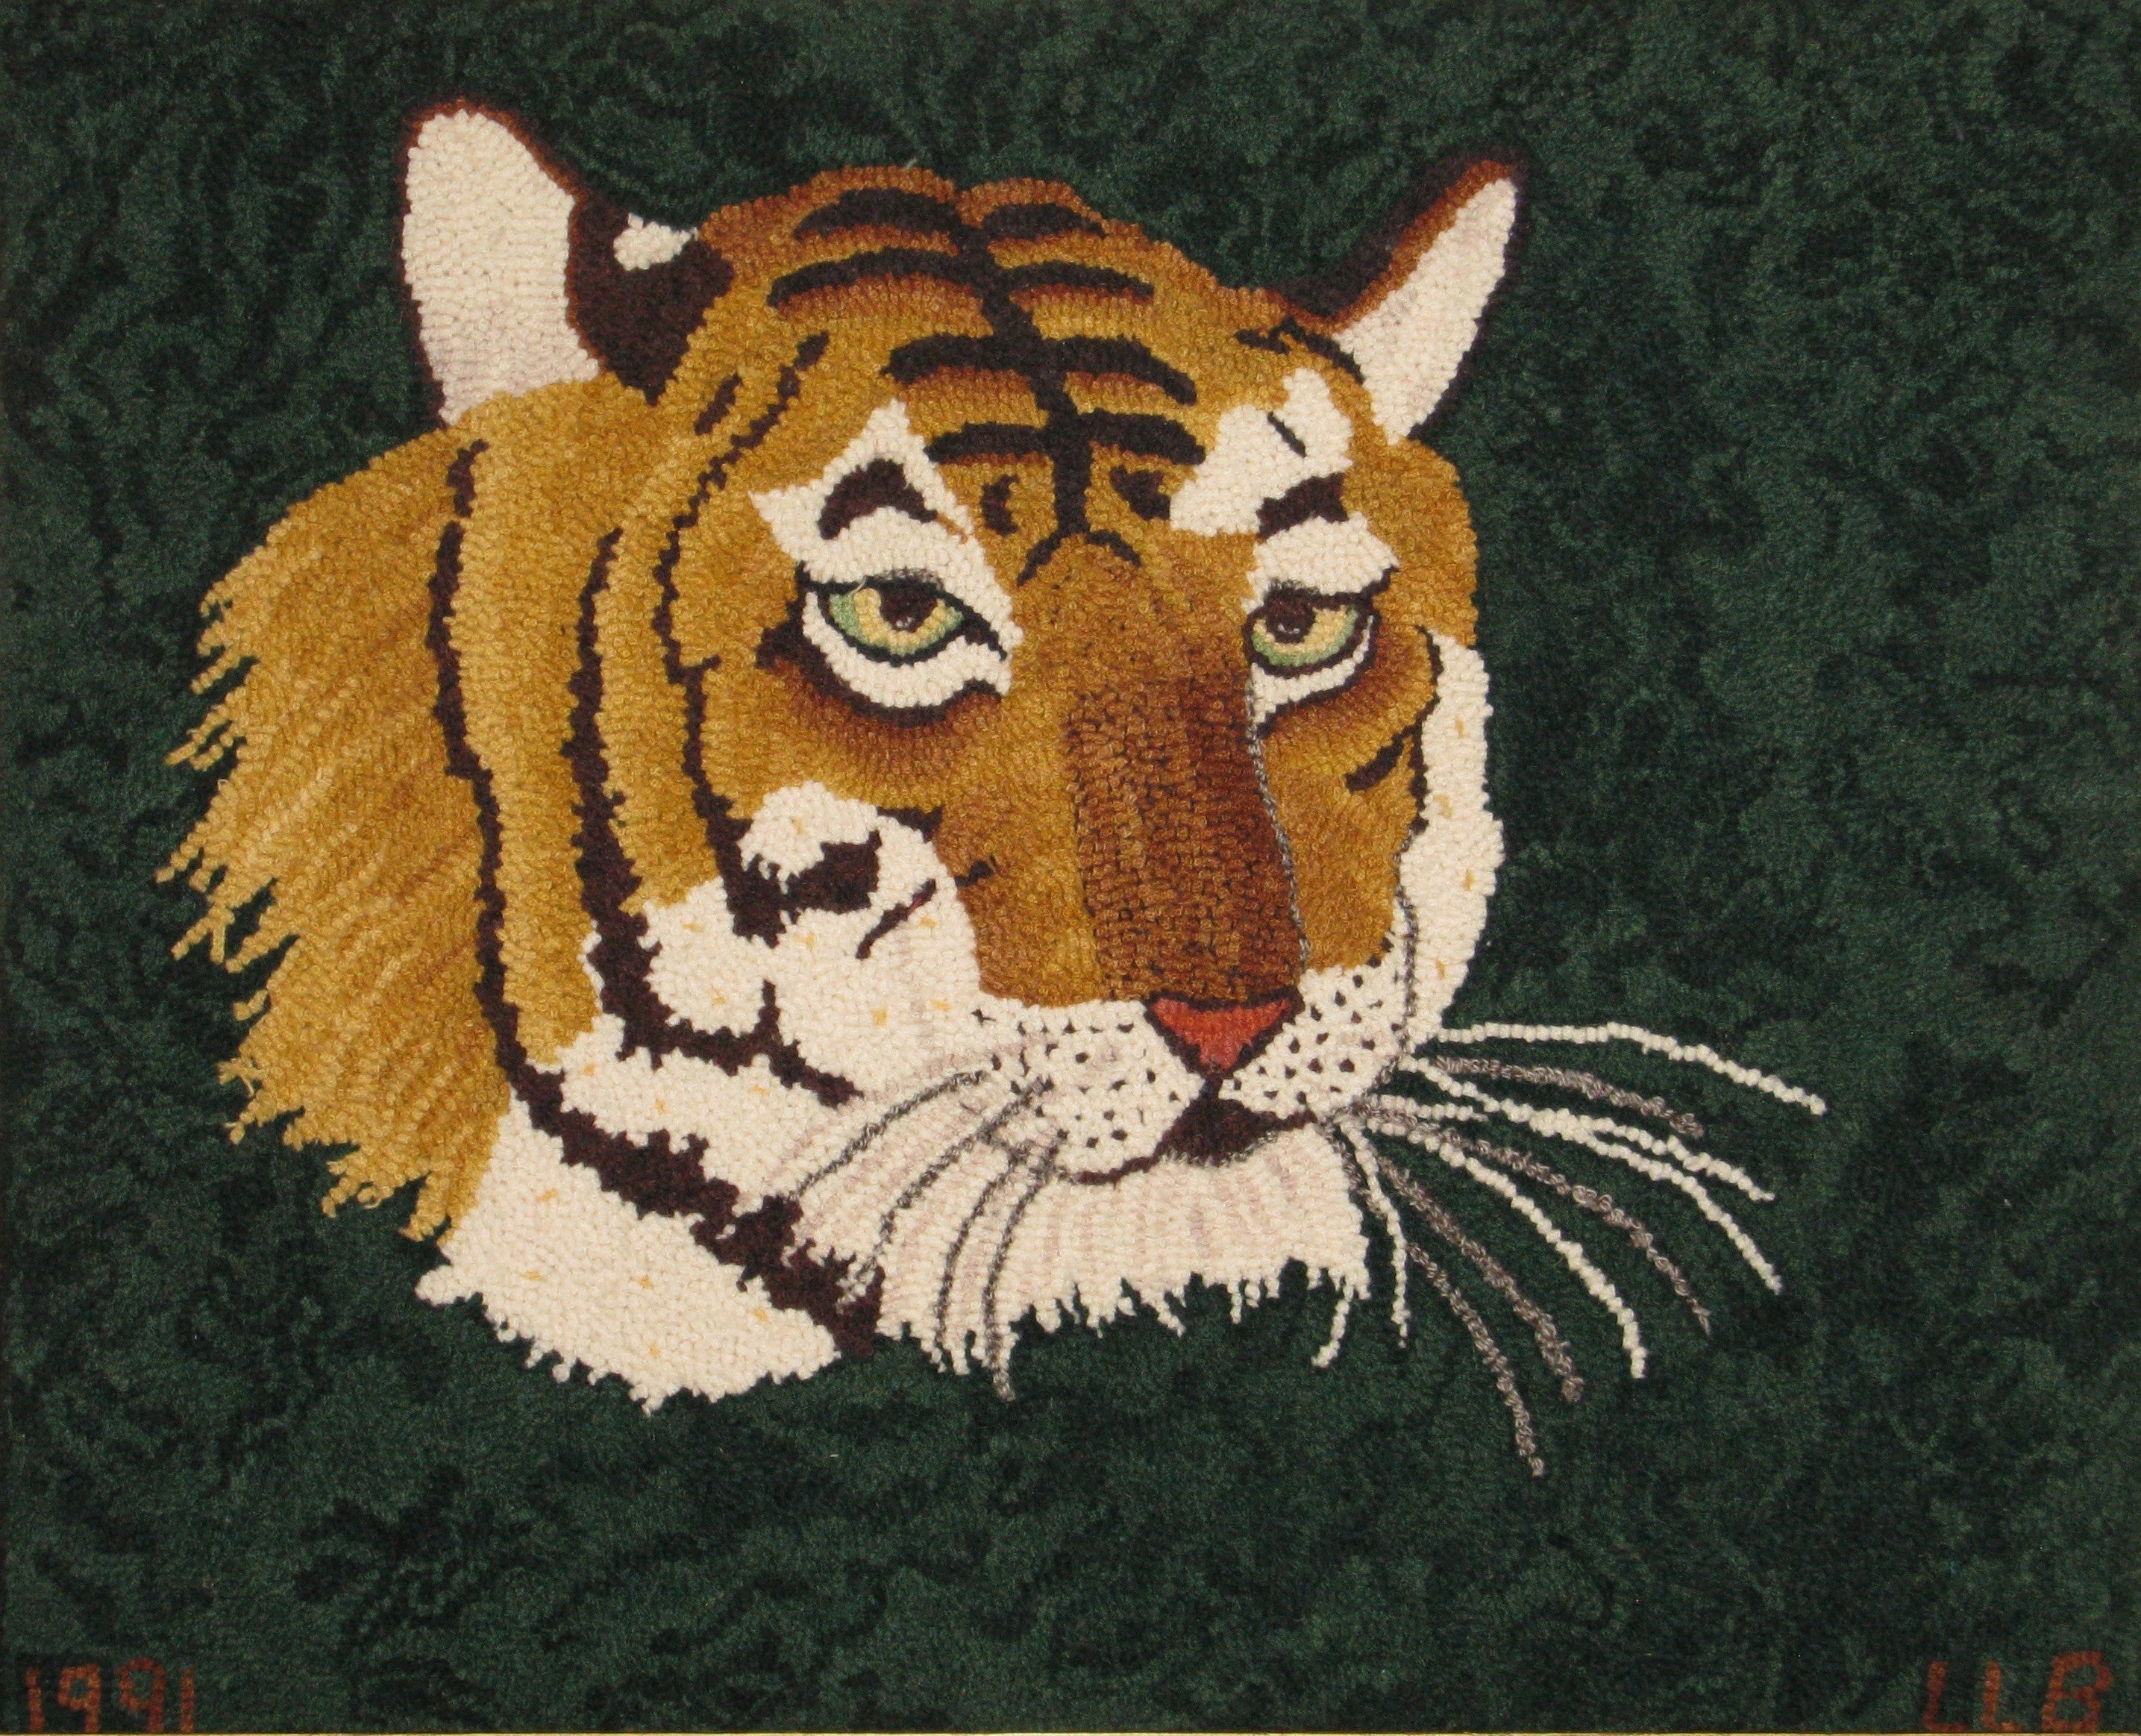 P723: Tiger - Tiger, Hooked by Linda Bell